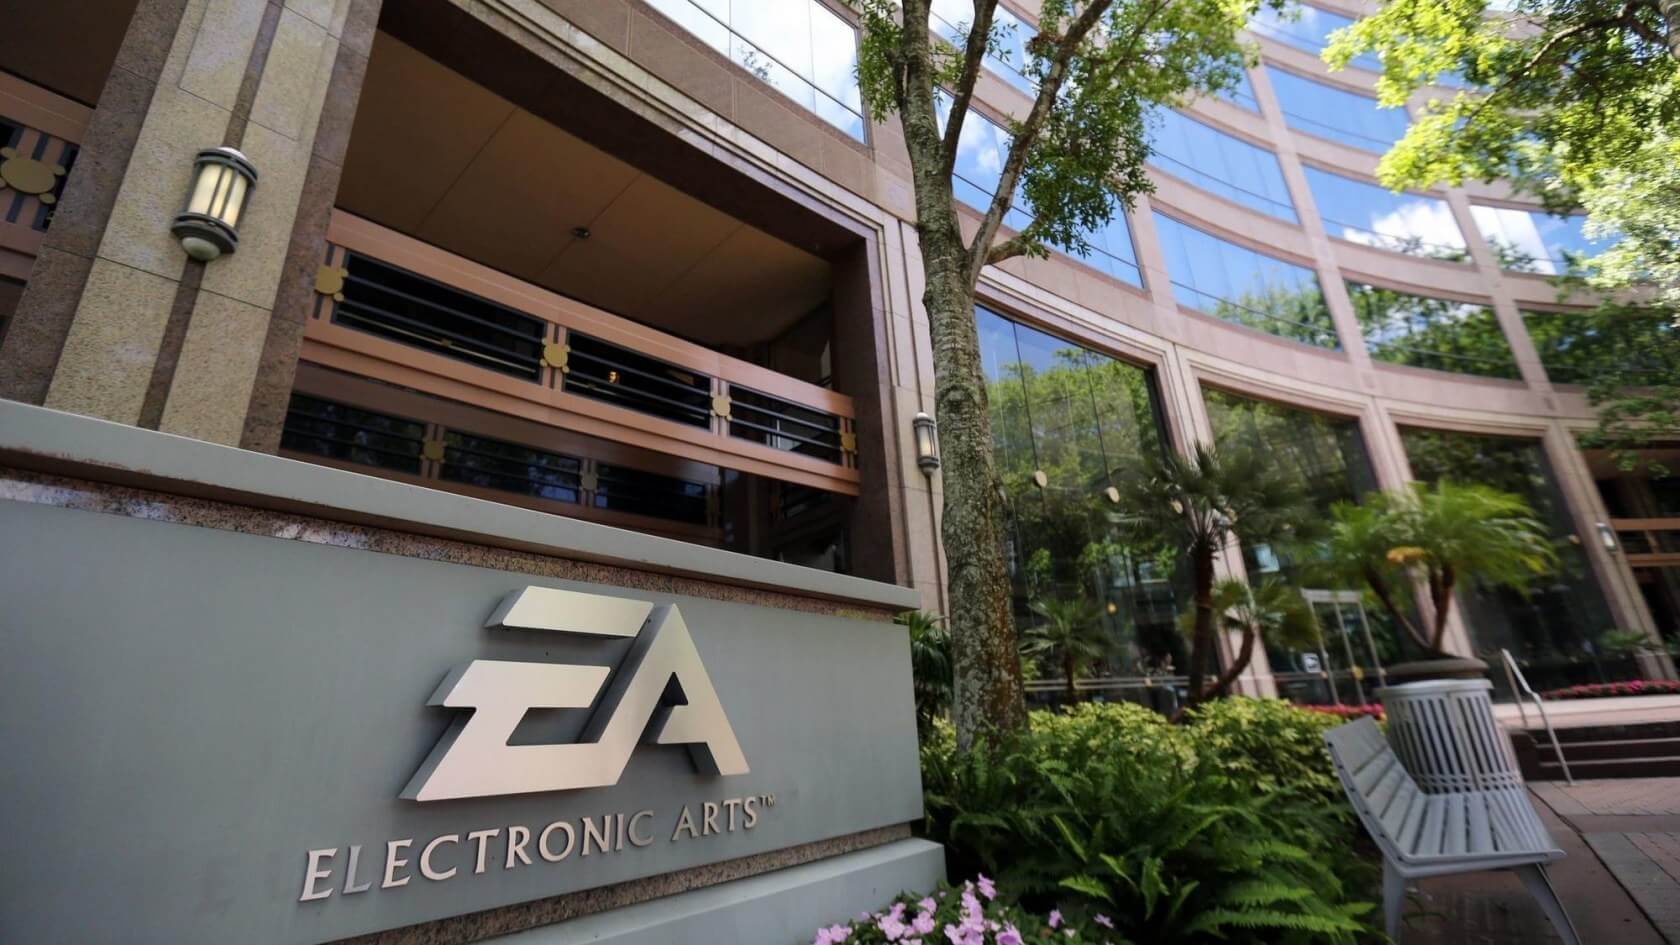 As the game streaming wars heat up, EA ponders its position